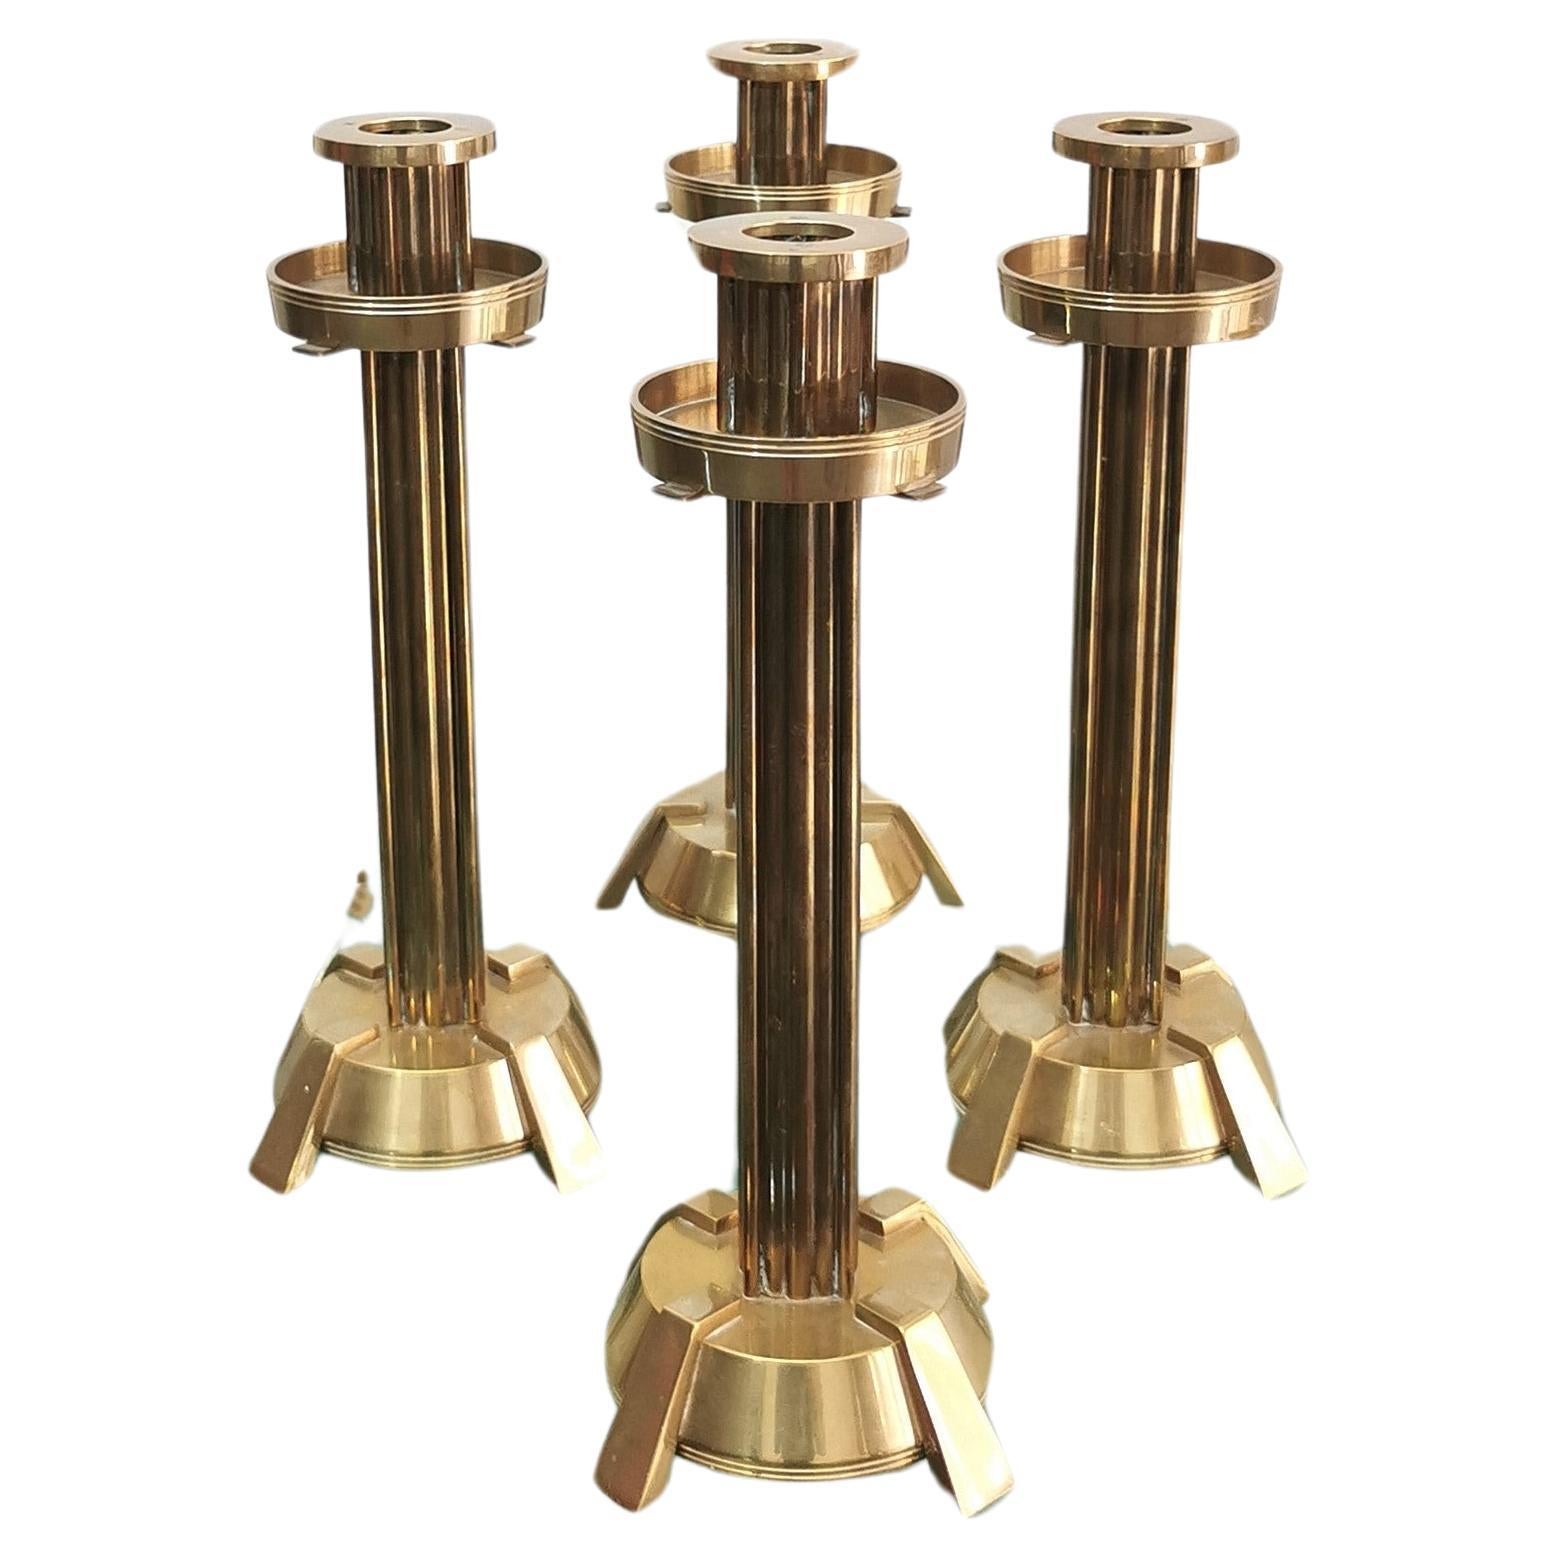 Decorative Object Brass Candelabras Candle Holders Midcentury Italy 70s Set of 4 For Sale